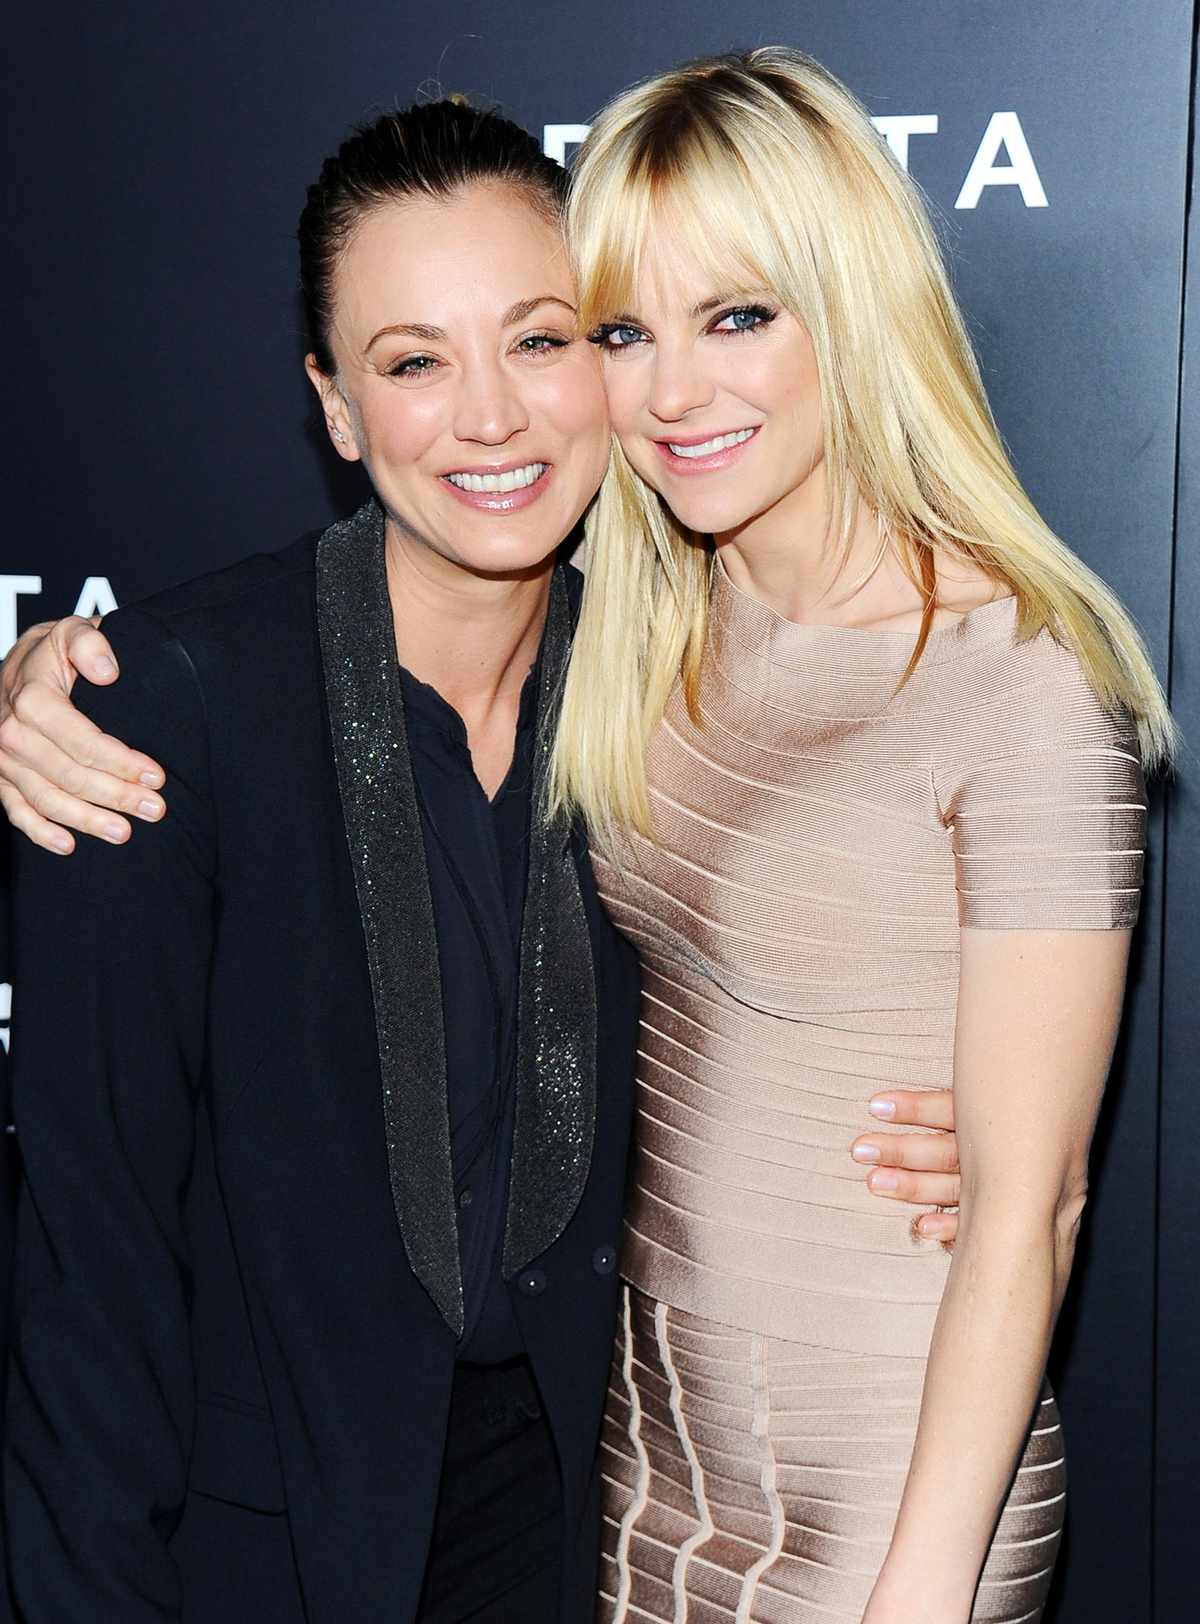 Kaley Cuoco and Anna Faris Bond Over Red BMW | InStyle